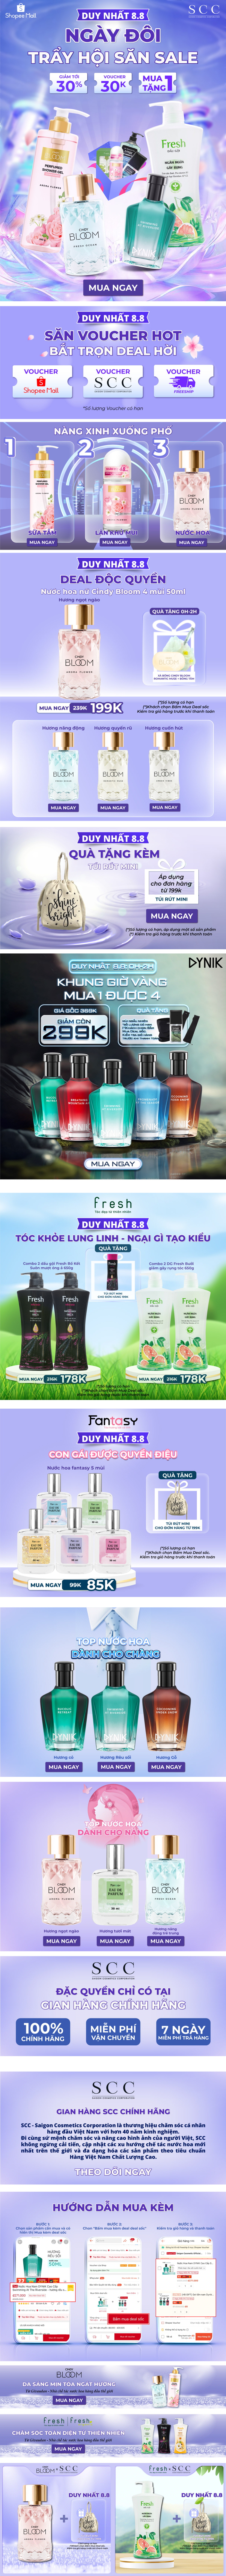 poster Ecommerce perfume cosmetics graphic design  photoshop Illustrator Shopee langding page